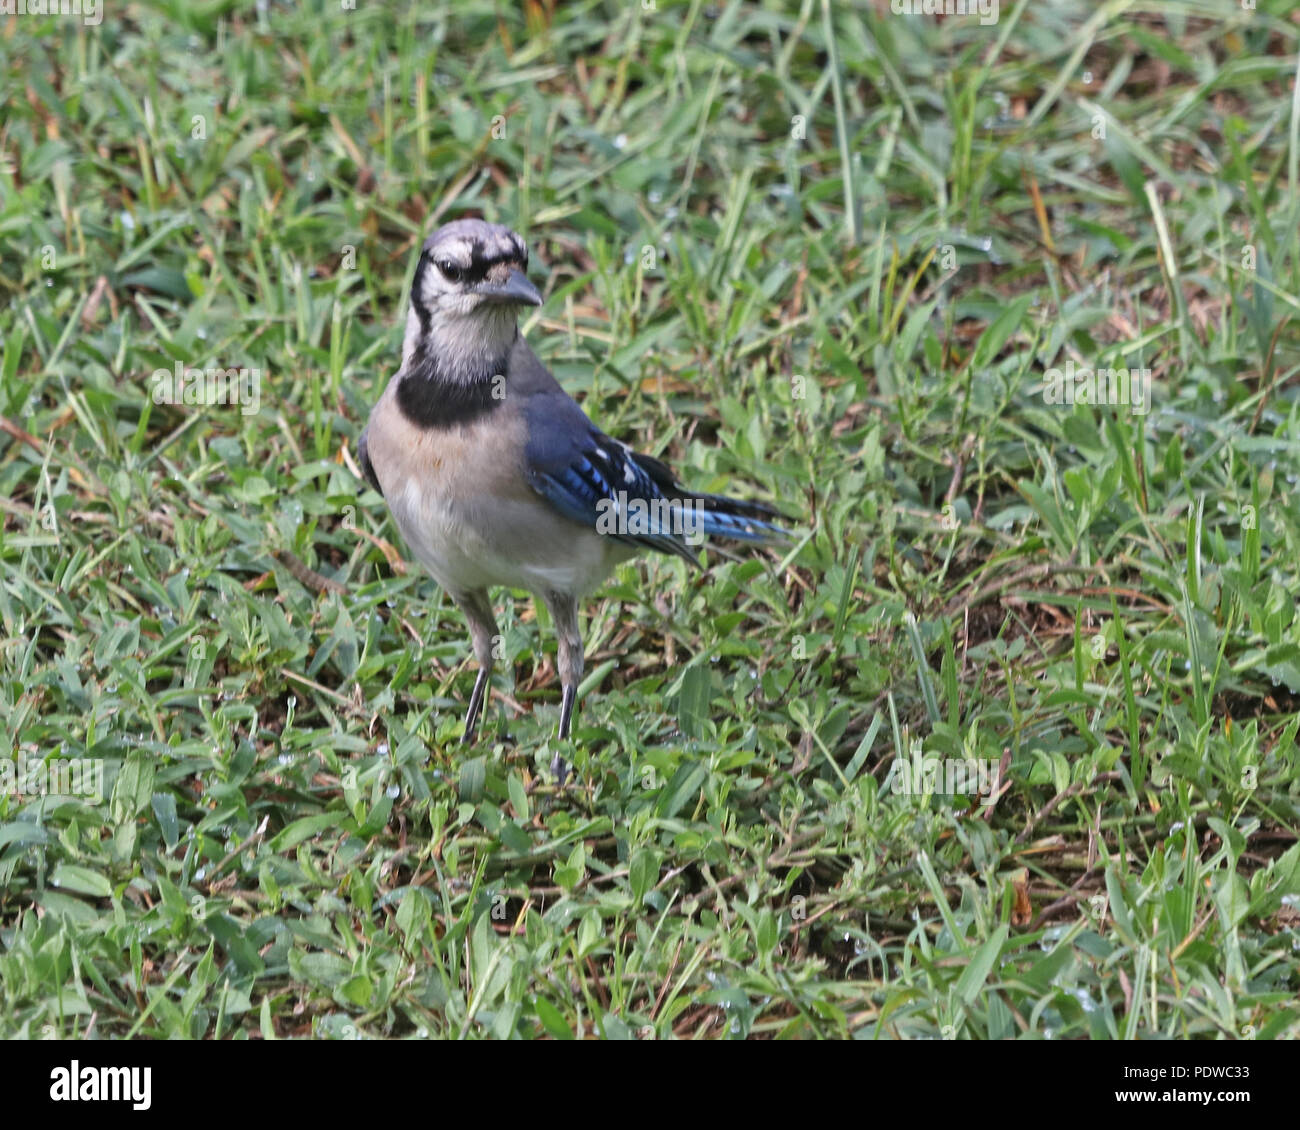 Smaller sized Blue jay standing on grass lawn Stock Photo